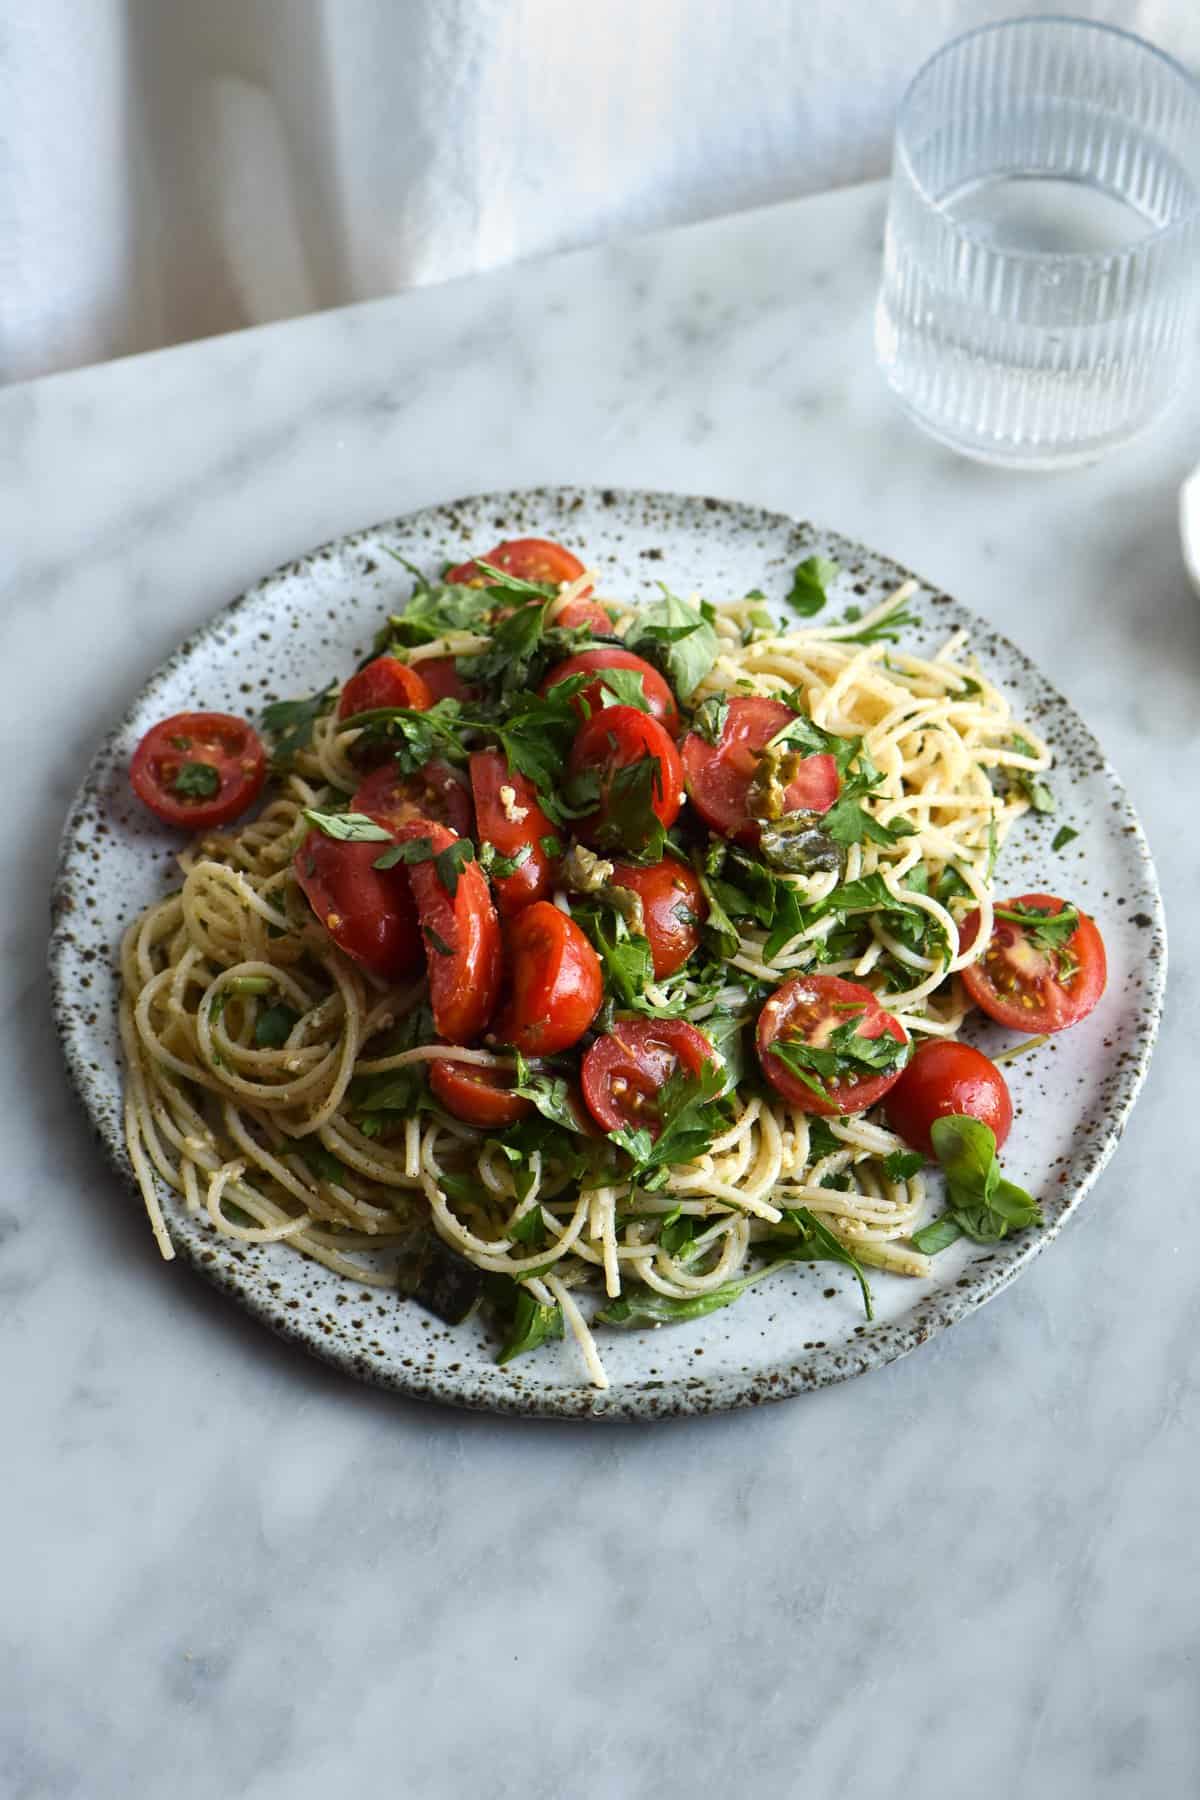 A plate of gluten free pasta with brown butter, lemon and herb sauce, topped with fresh summer tomatoes. Set against a white marble backdrop on a white ceramic plate.